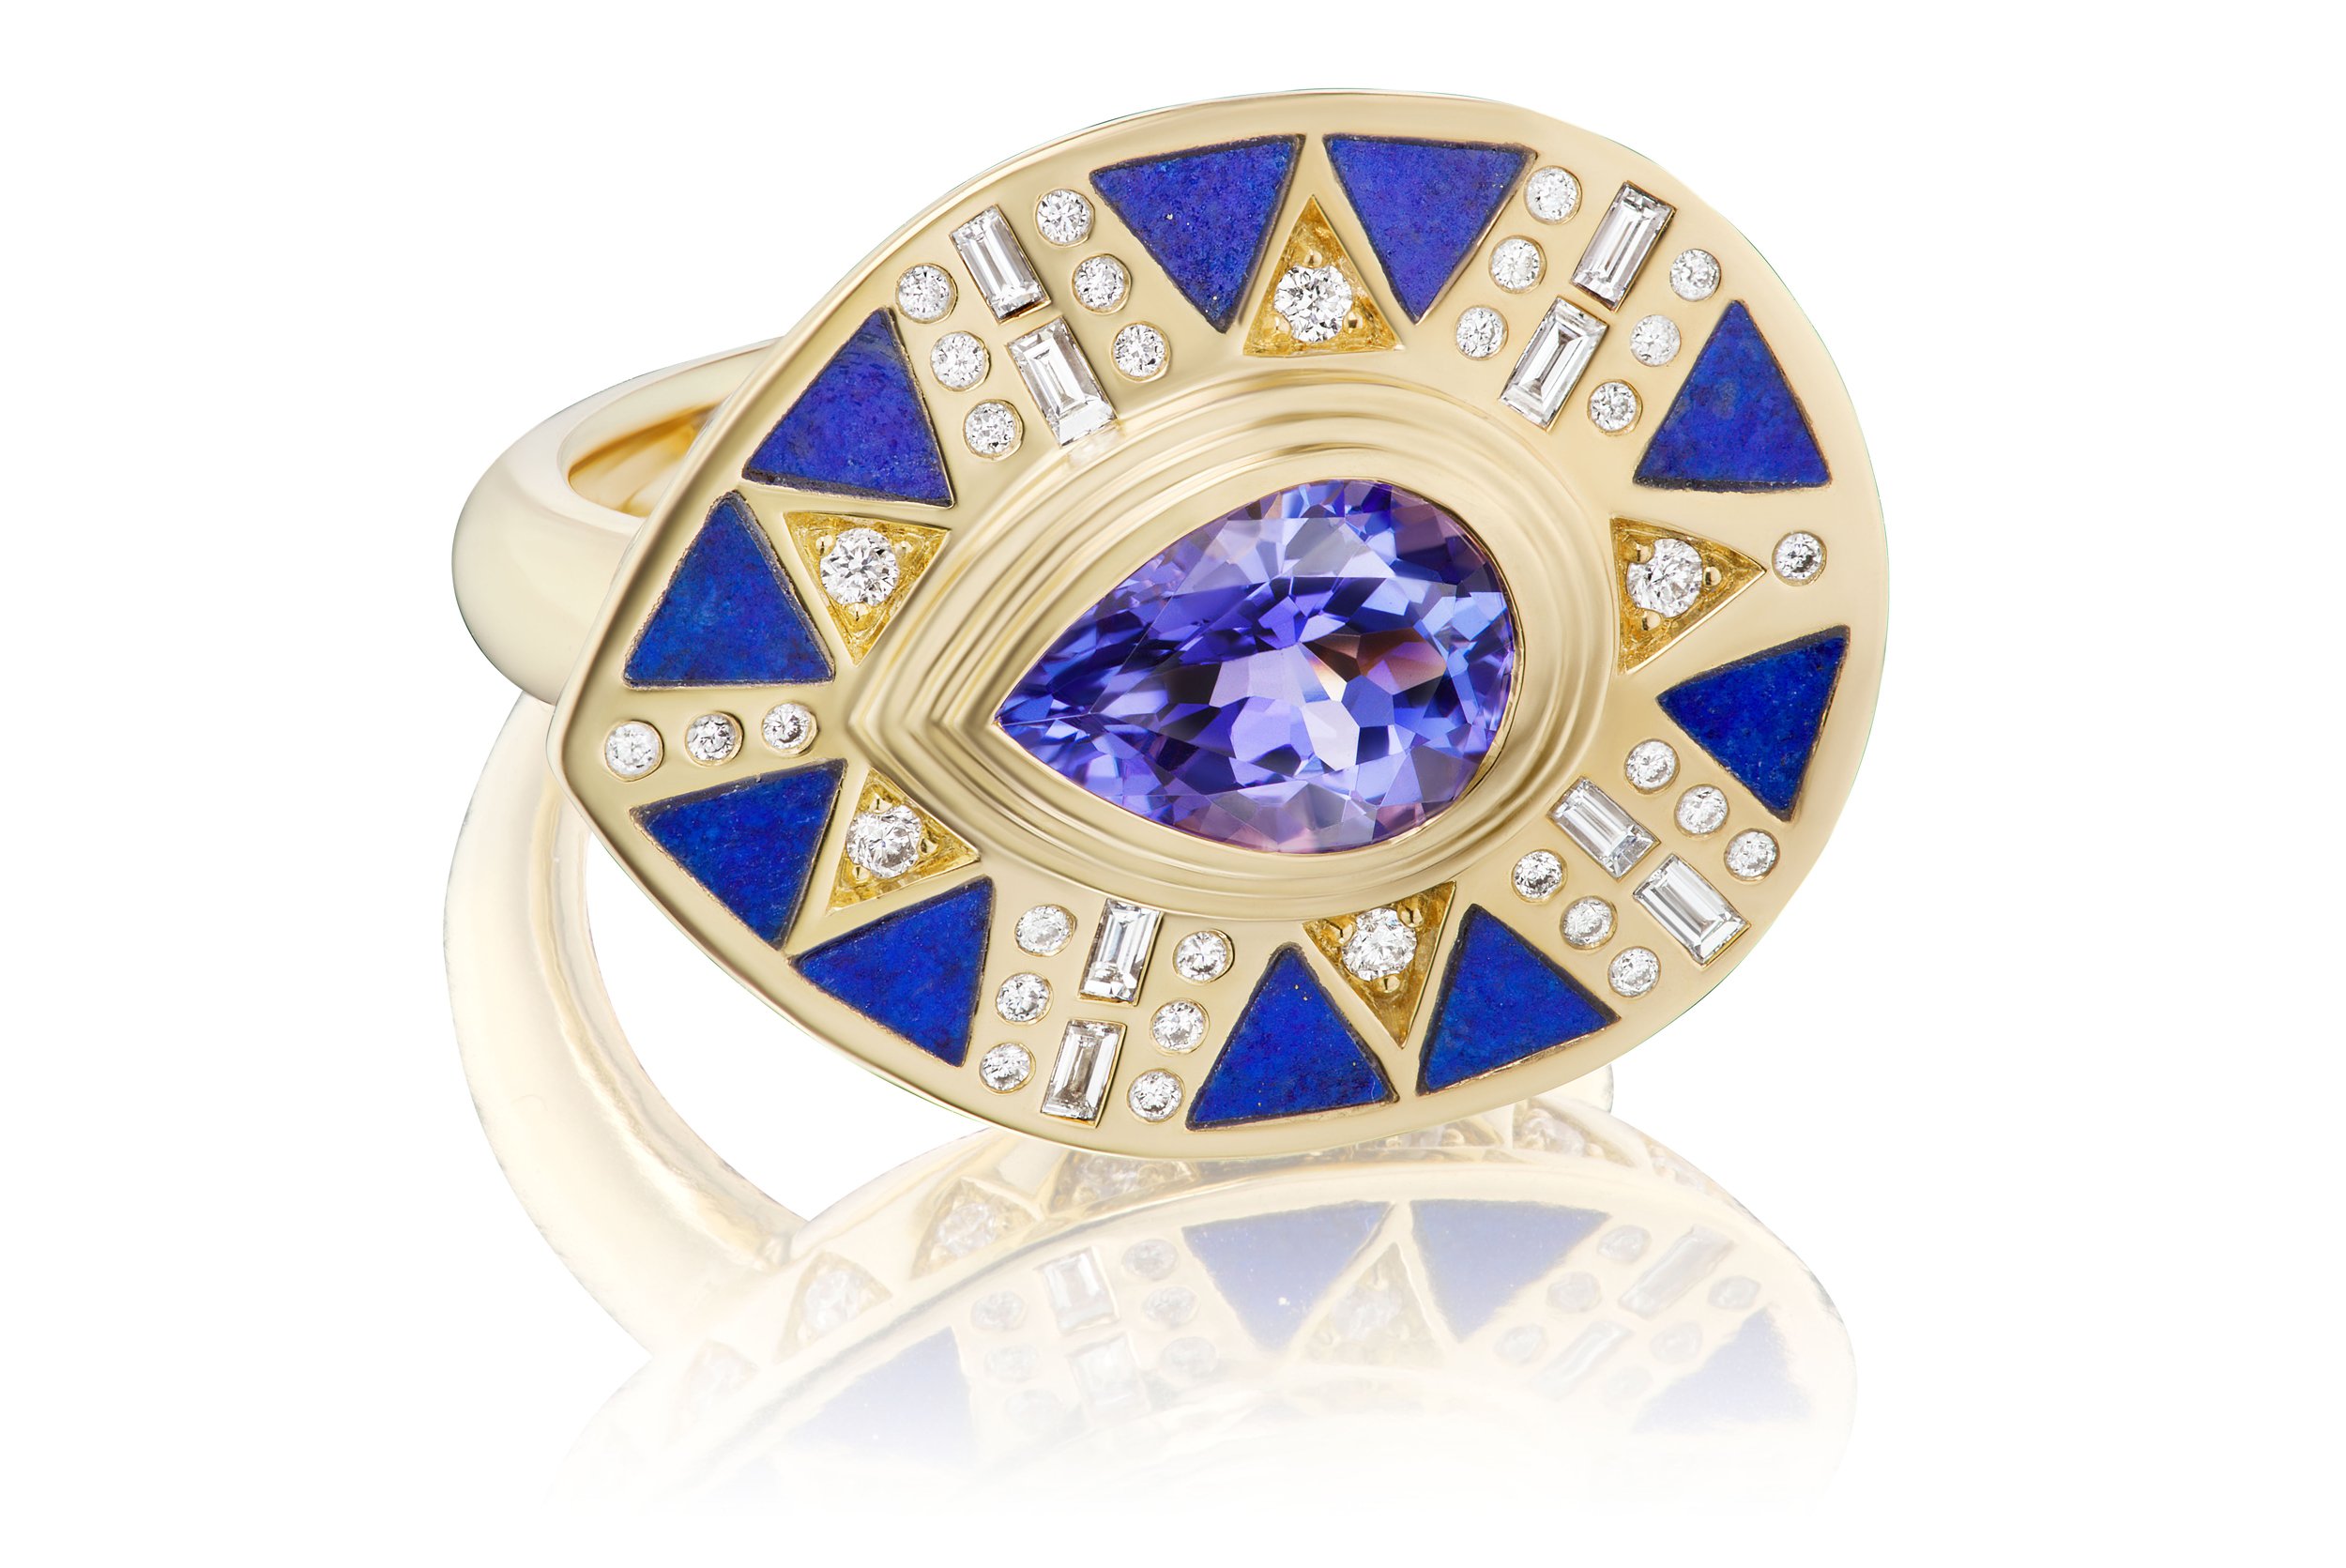 Gold ring with inset blue stones, diamonds and center deep purple teardrop shaped stone in gold design.